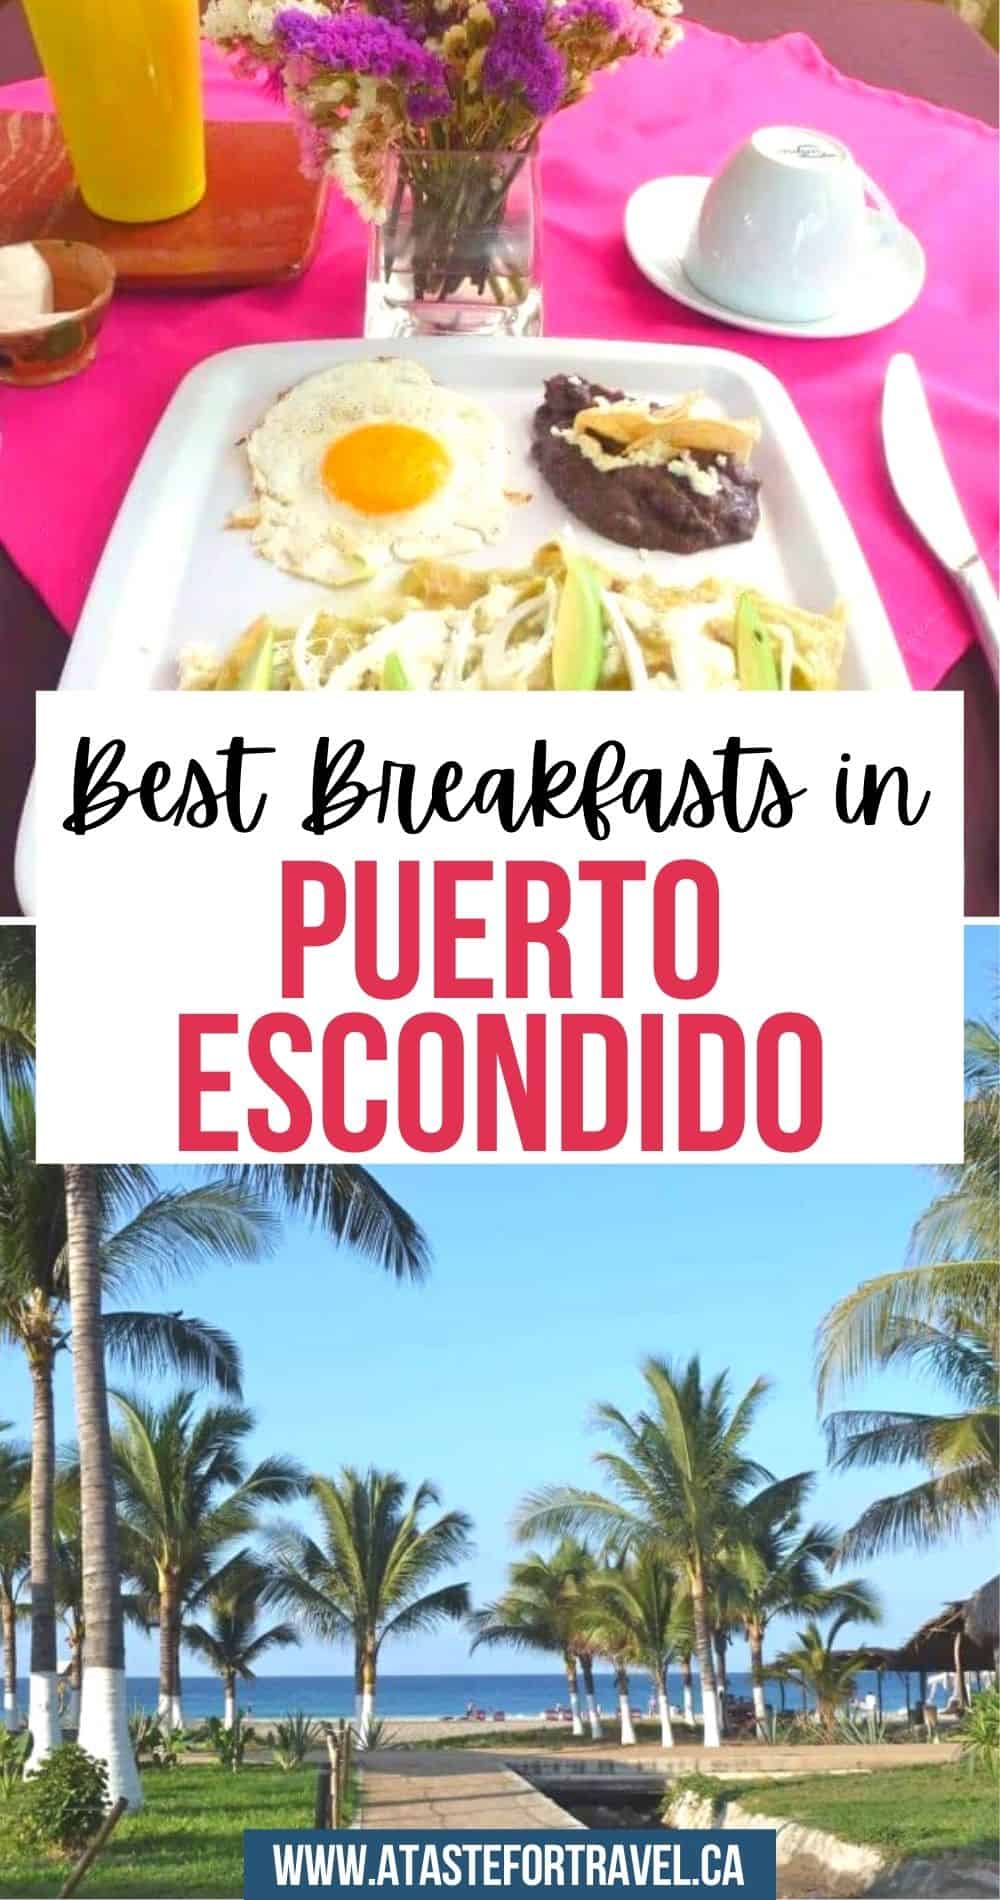 Collage of palm trees and egg dish and Pinterest text of best breakfasts in Puerto Escondido.